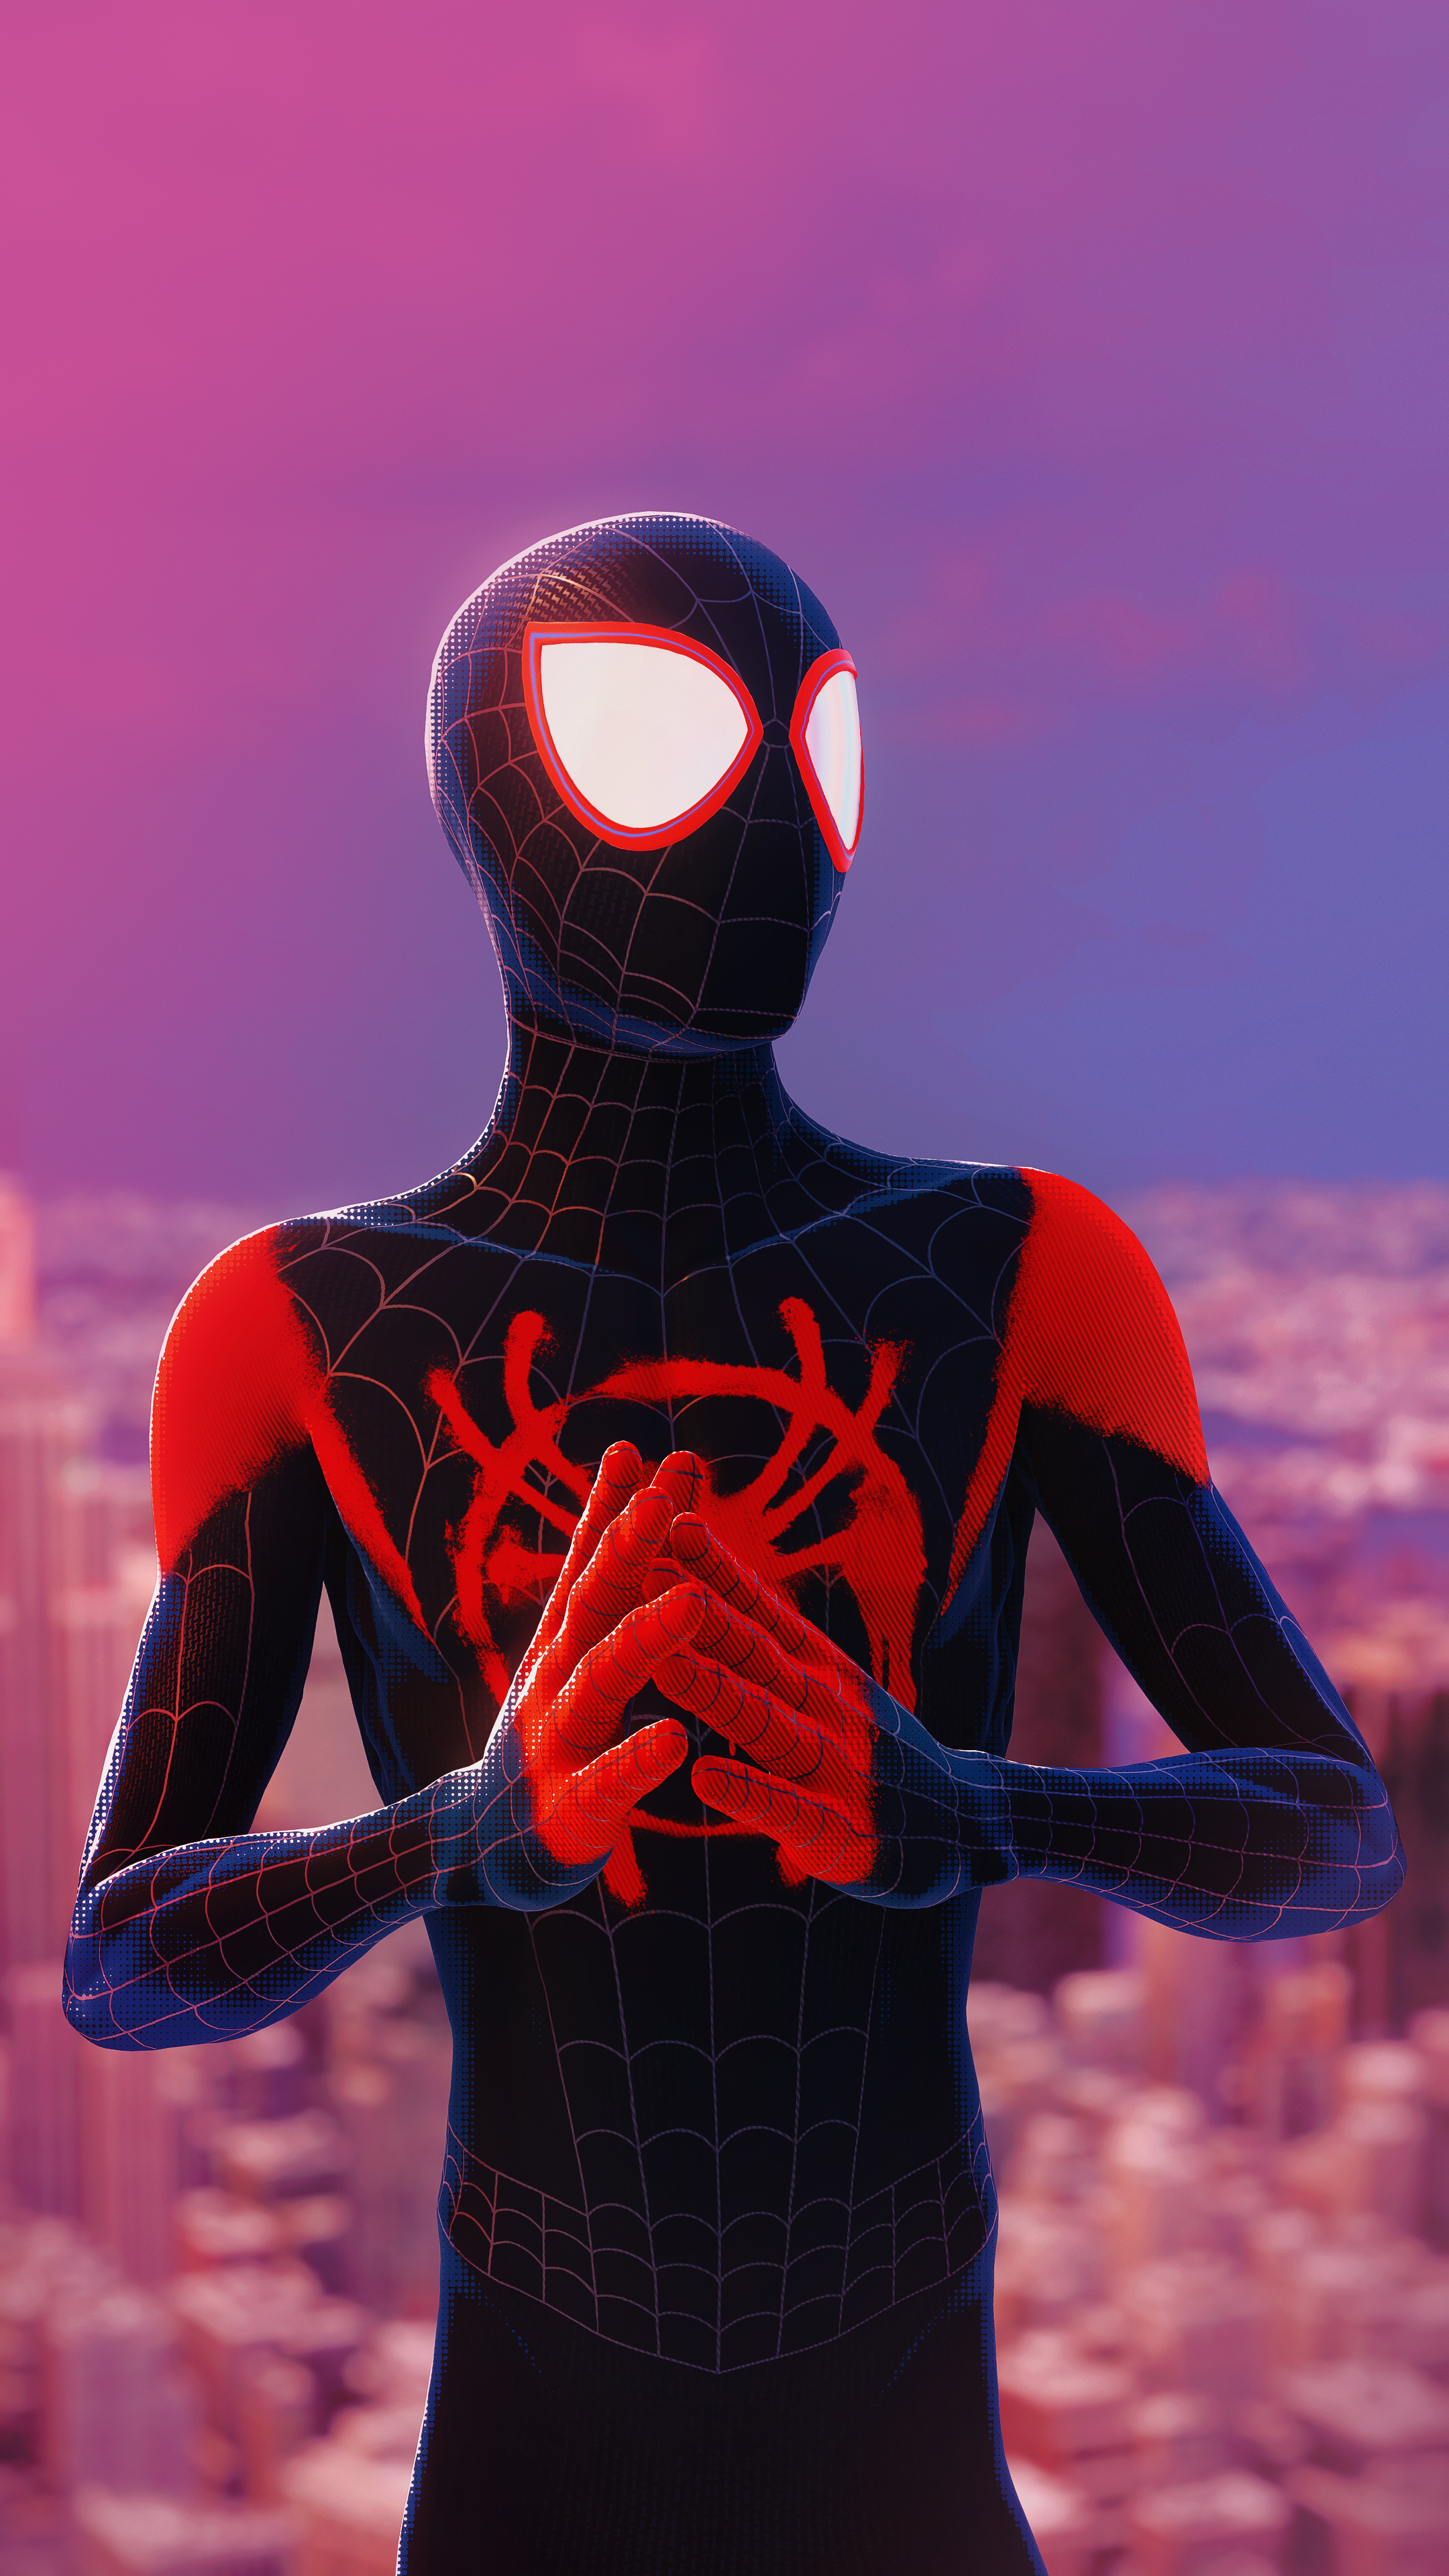 Download wallpaper 750x1334 miles morales black suit spiderman into the  spiderverse iphone 7 iphone 8 750x1334 hd background 15269